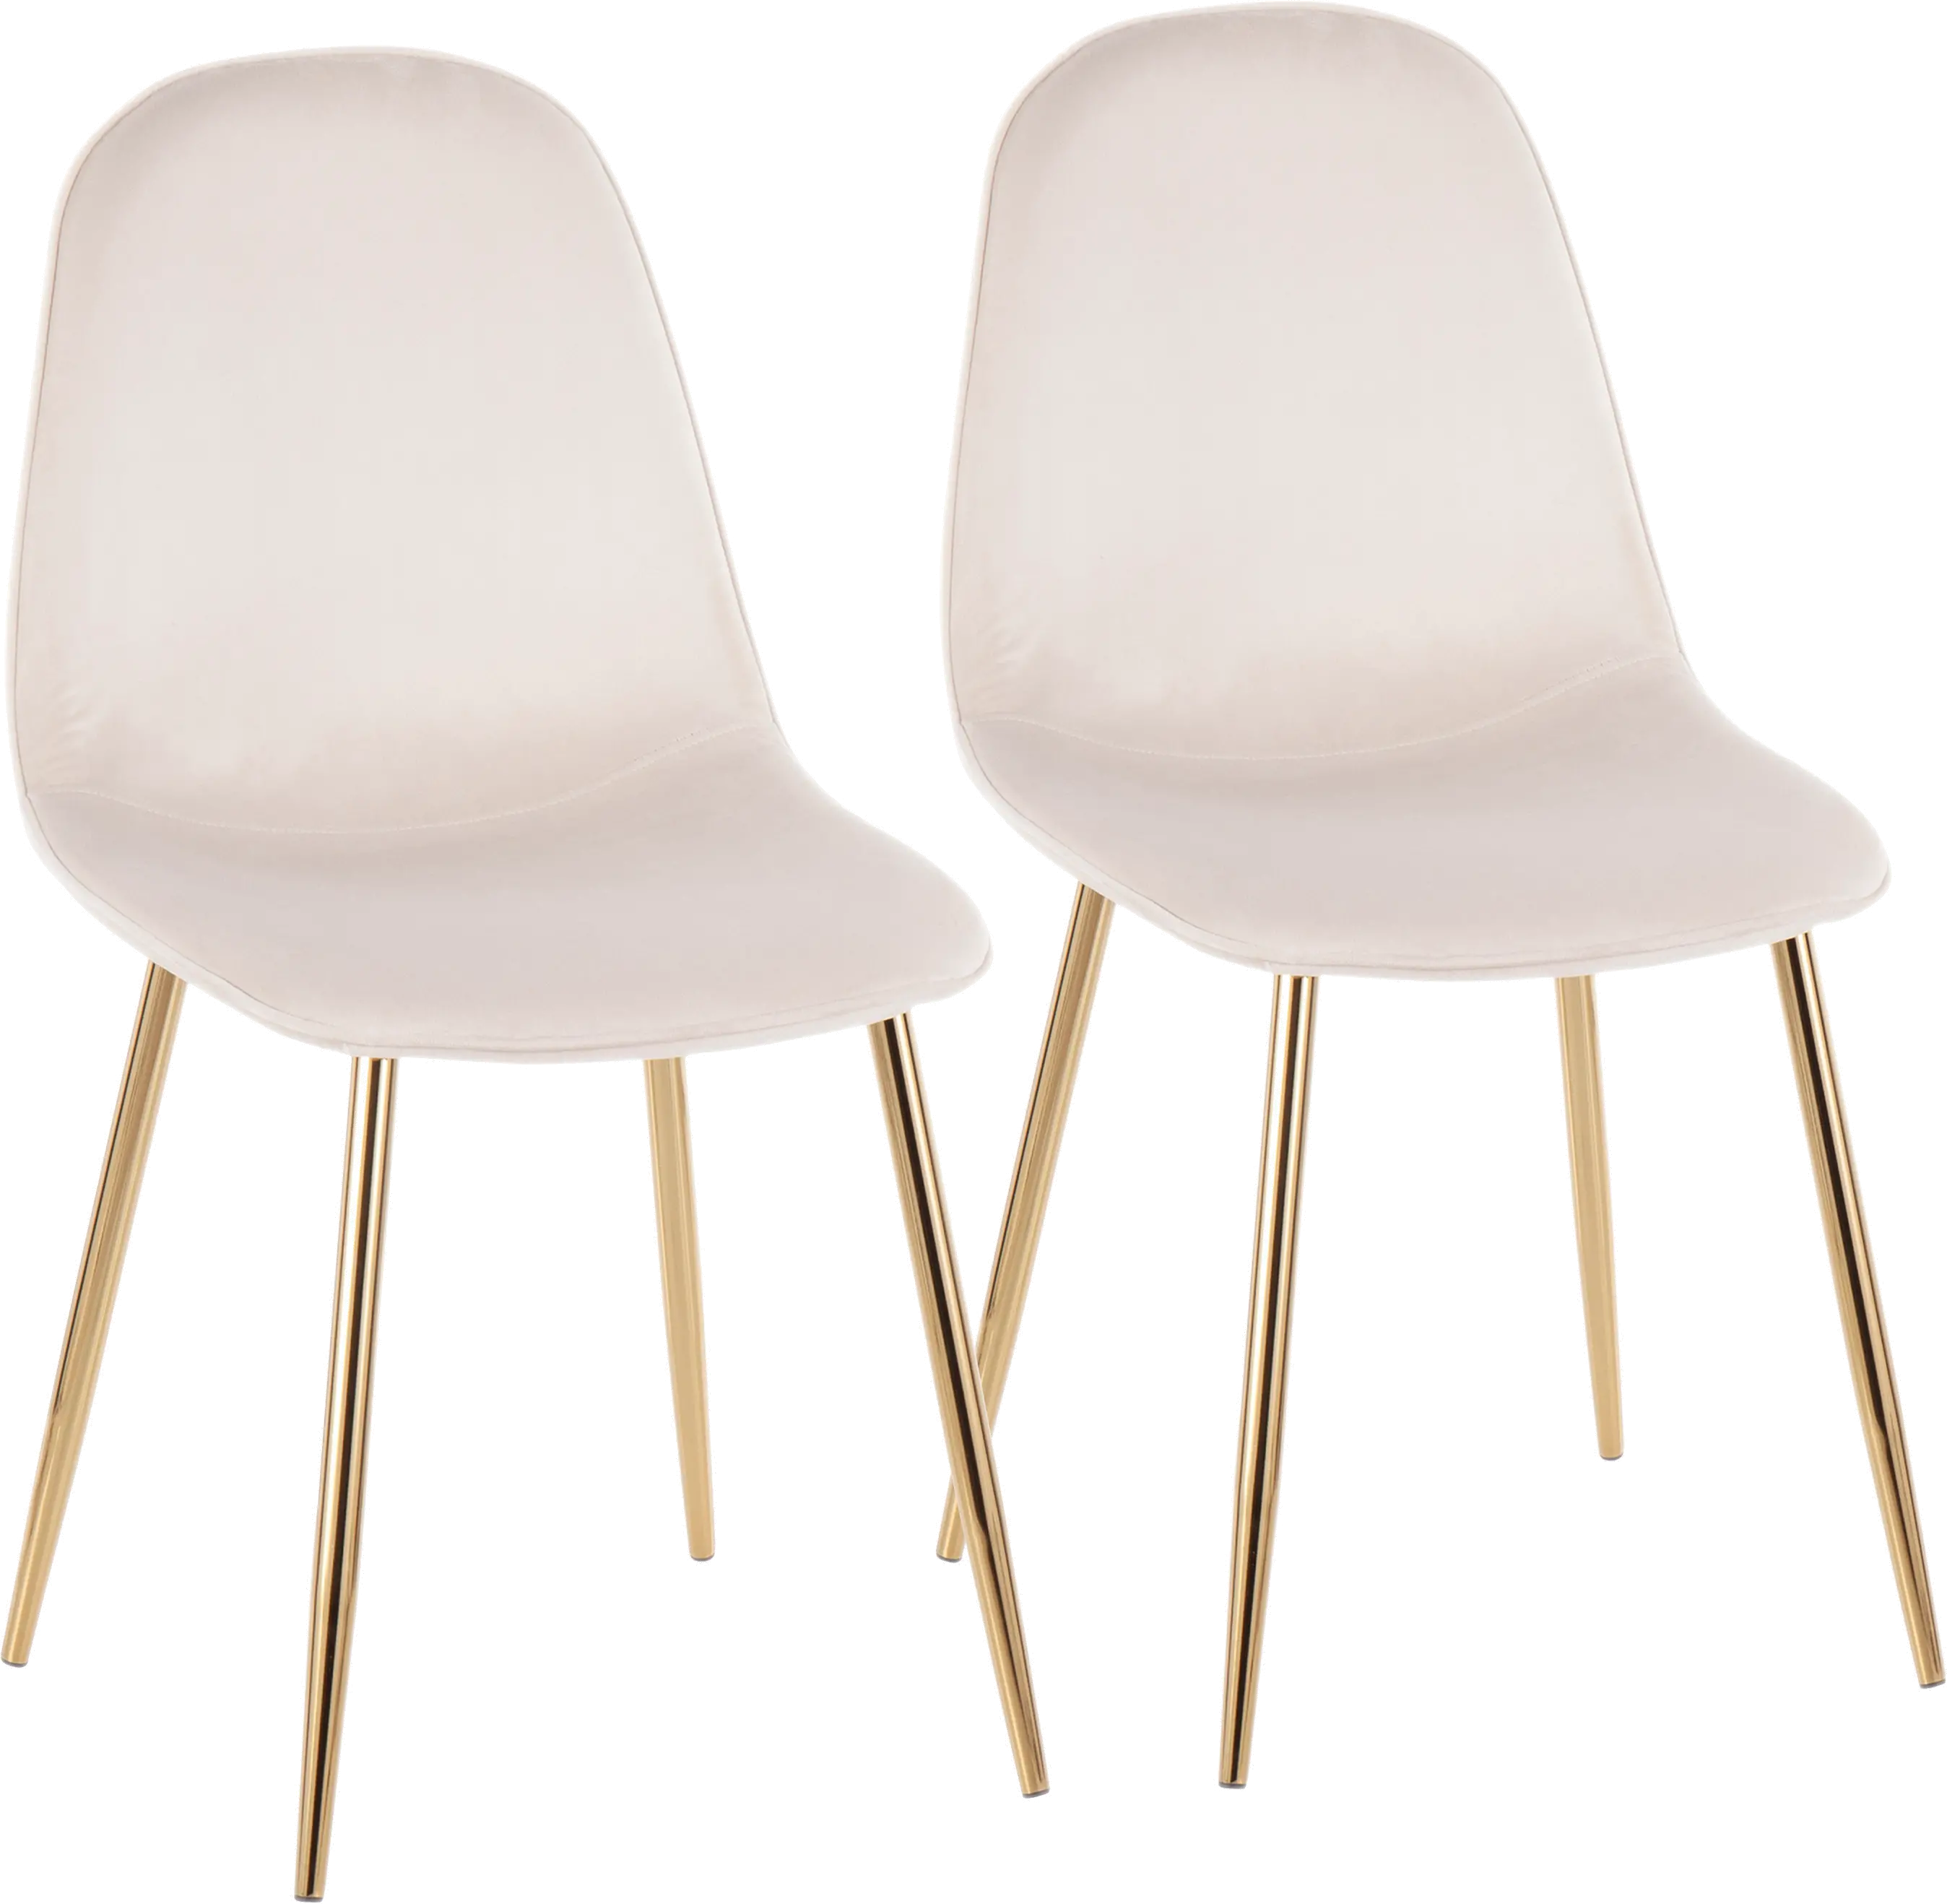 Contemporary Cream and Gold Dining Room Chair (Set of 2) - Pebble